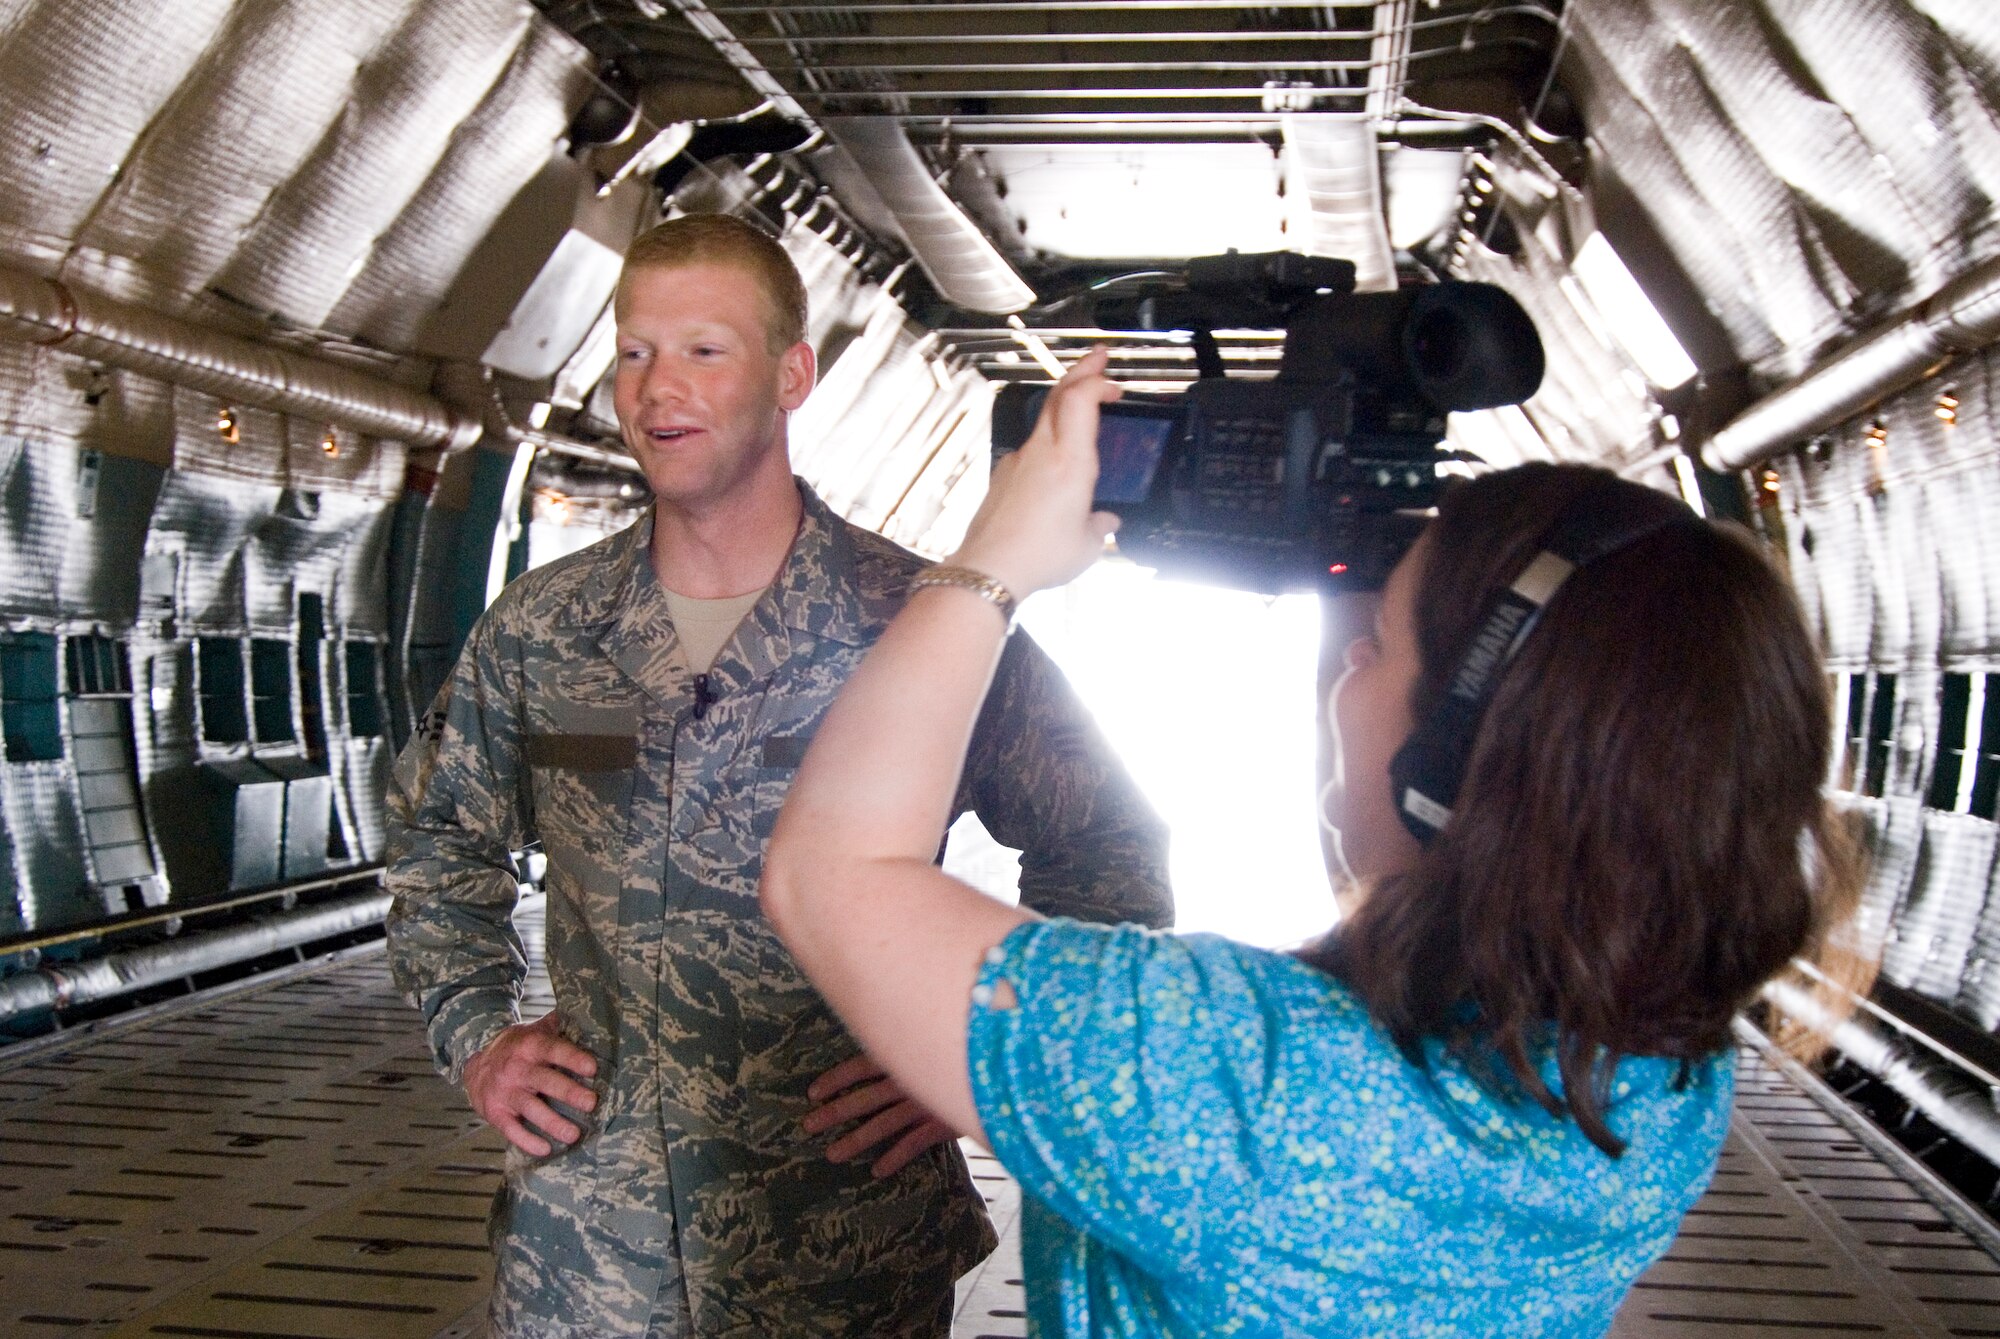 Hannah Maxwell, a production assistant for West Virginia University's Television Productions, documents an interview for a recruiting video for WVU with Senior Airman Nathan Sisler in a C-5 aircraft at the 167th Airlift Wing, Martinsburg, West Virginia, on August 27, 2009. Sisler, a WVU senior and a West Virginia Airman of the Year recipient for 2009, was chosen to be featured in the video because of his leadership qualities according to Kelly Heasley, special projects prouducer for WVU's Television Productions. (U.S. Air Force Photo by Emily Beightol-Deyerle)

